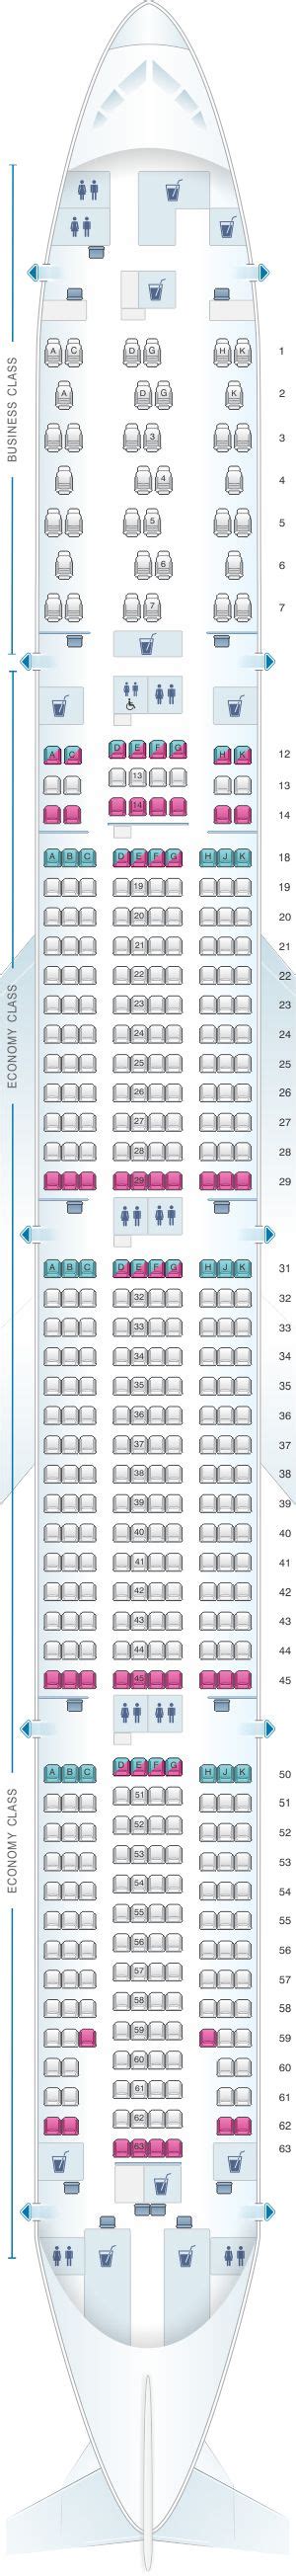 Airplane 77w Seat Map